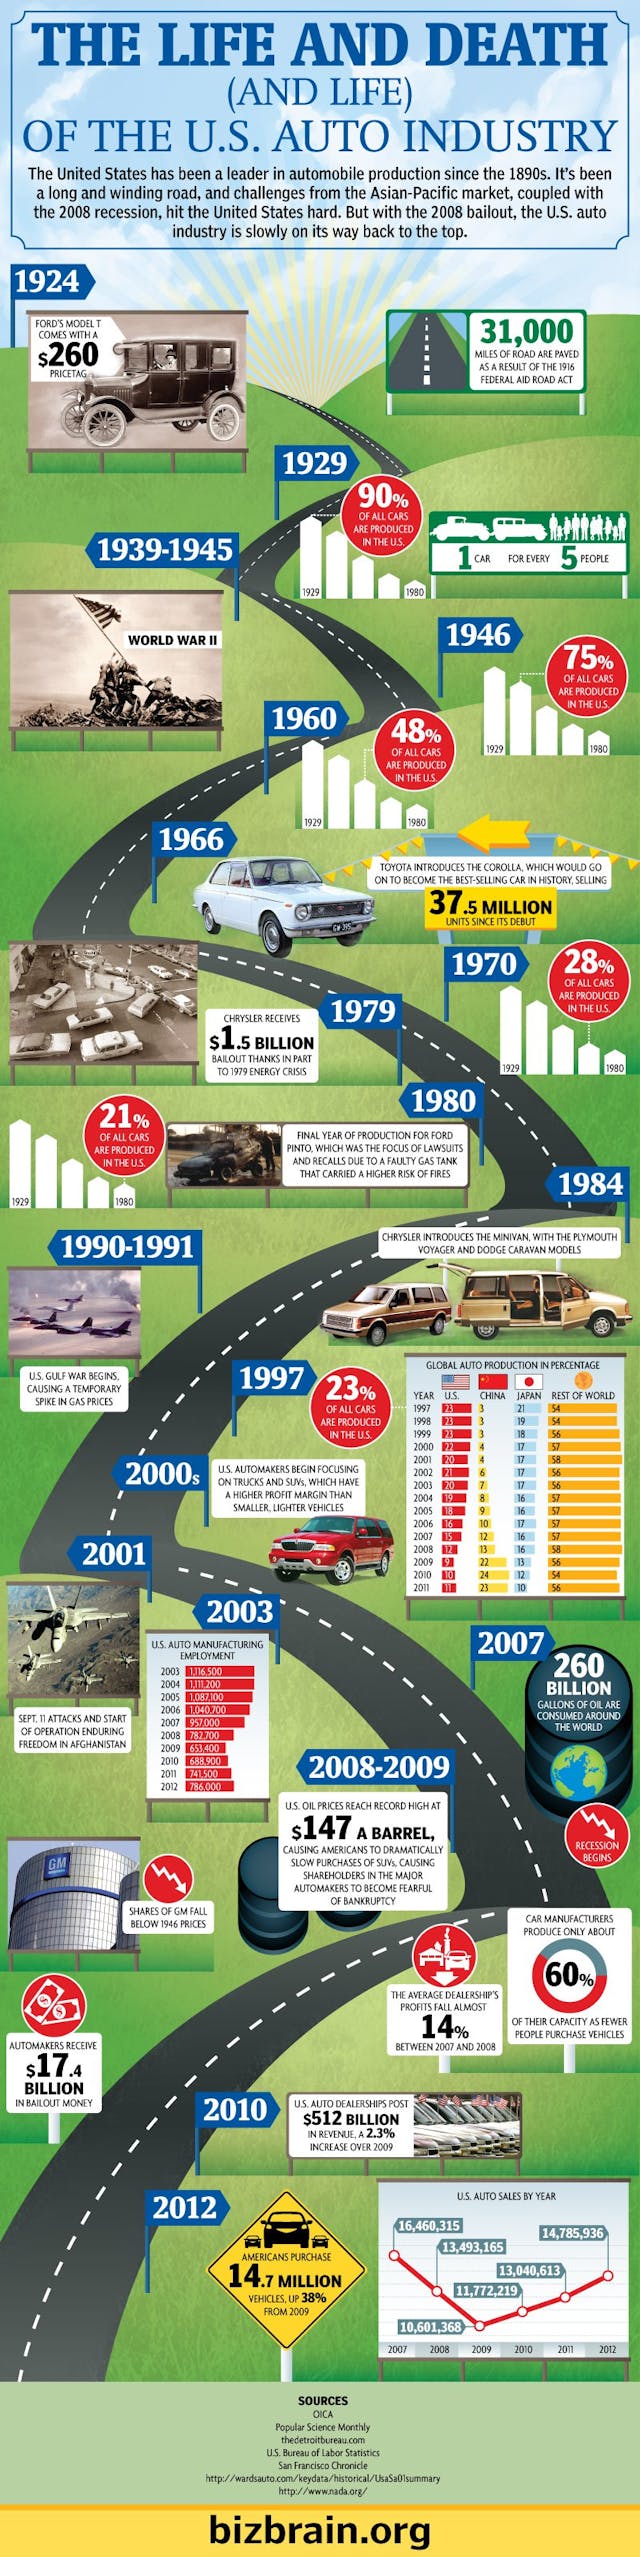 The Life And Death of the American Automobile Industry